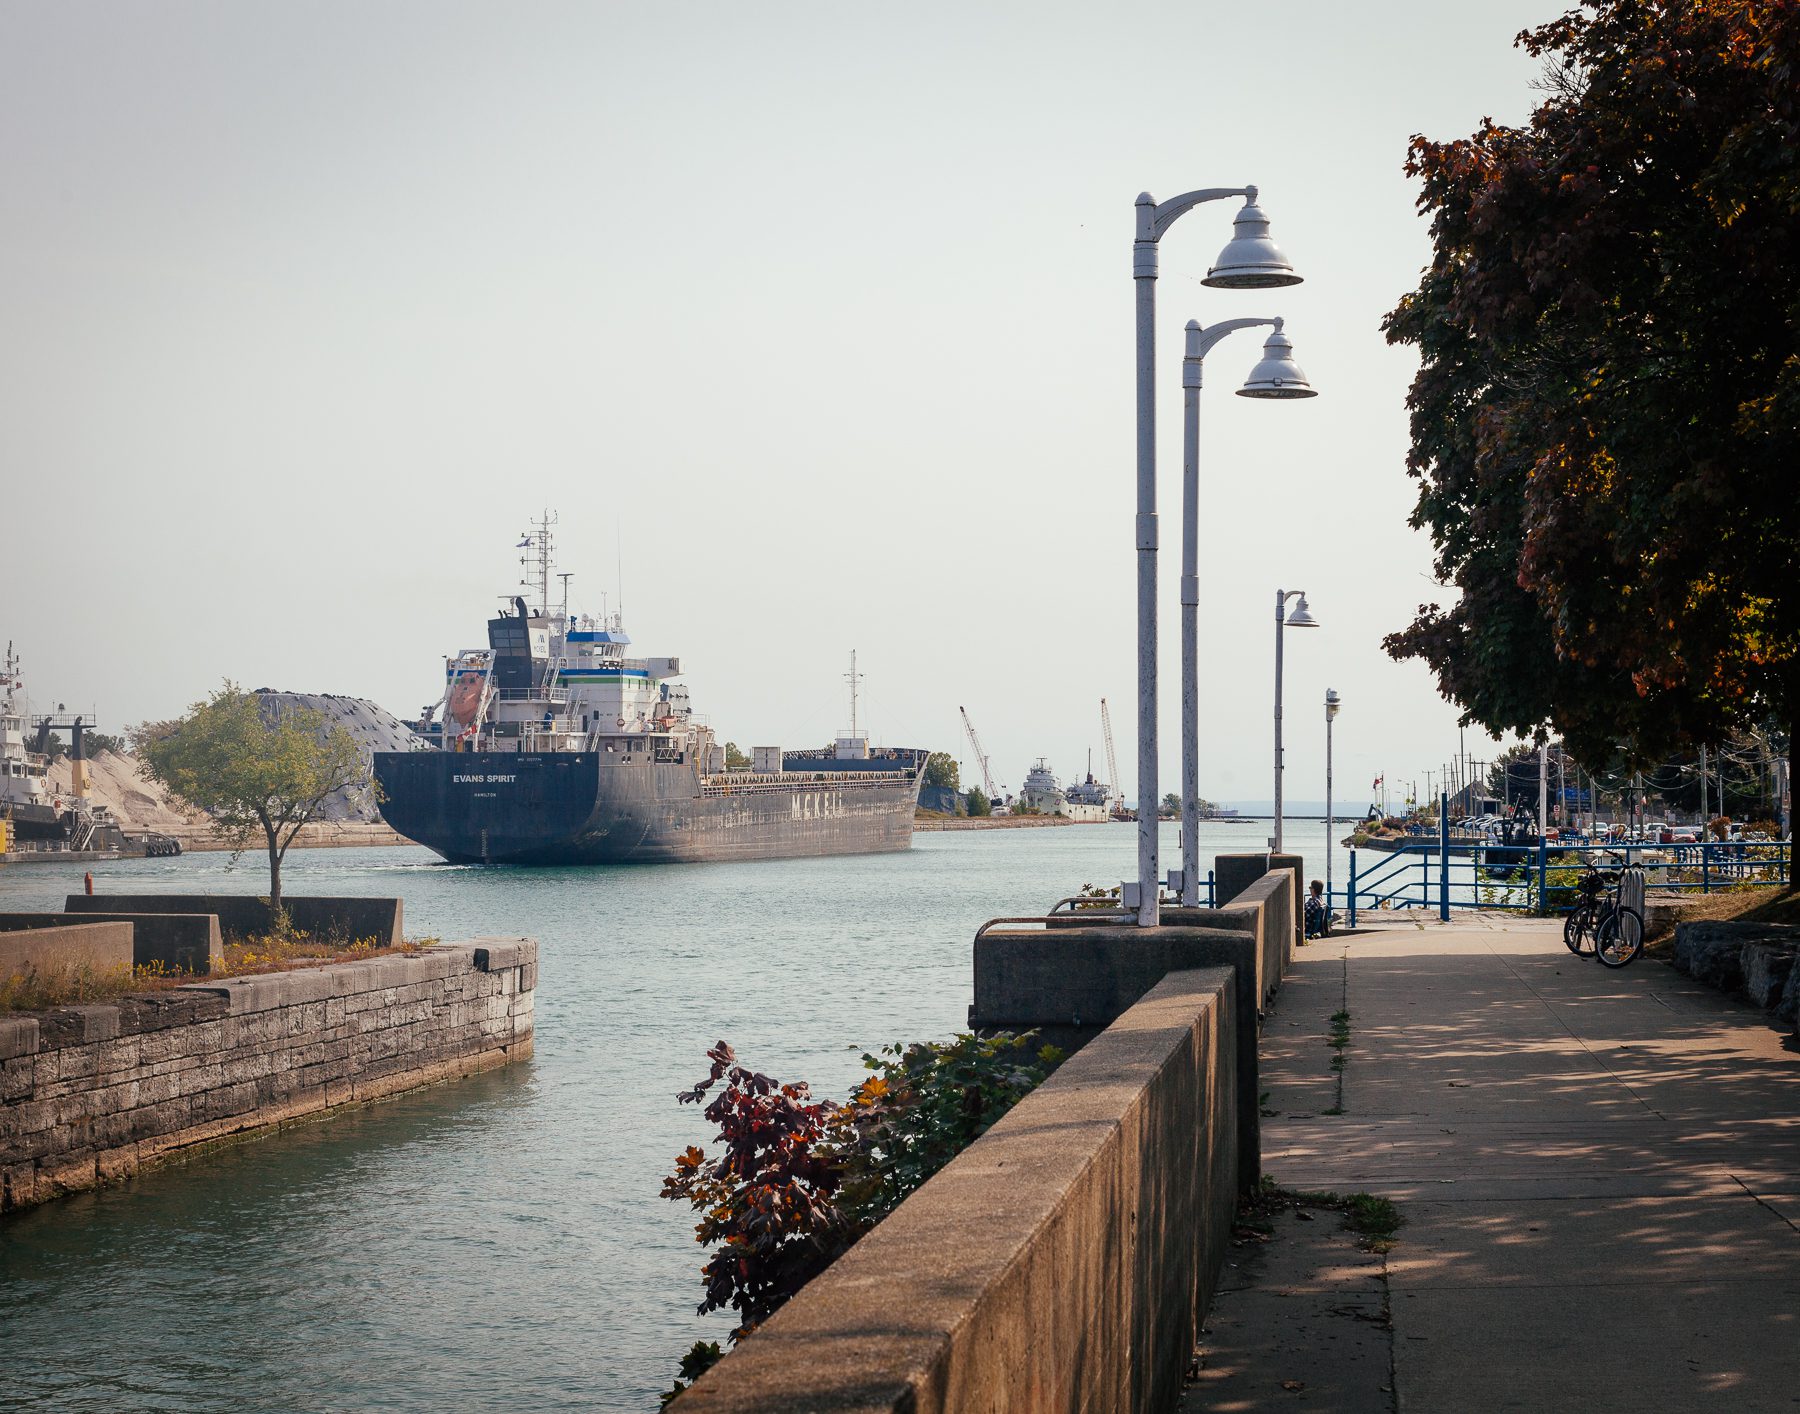 The Welland Canal, which connects Lake Ontario to Lake Erie, is a big part of Port Colborne’s identity. When Fred was a boy, he remembers how the community’s motto was “Port Colborne: site of the world’s longest locks.” While it is no longer the longest, it’s importance to the community has not changed.